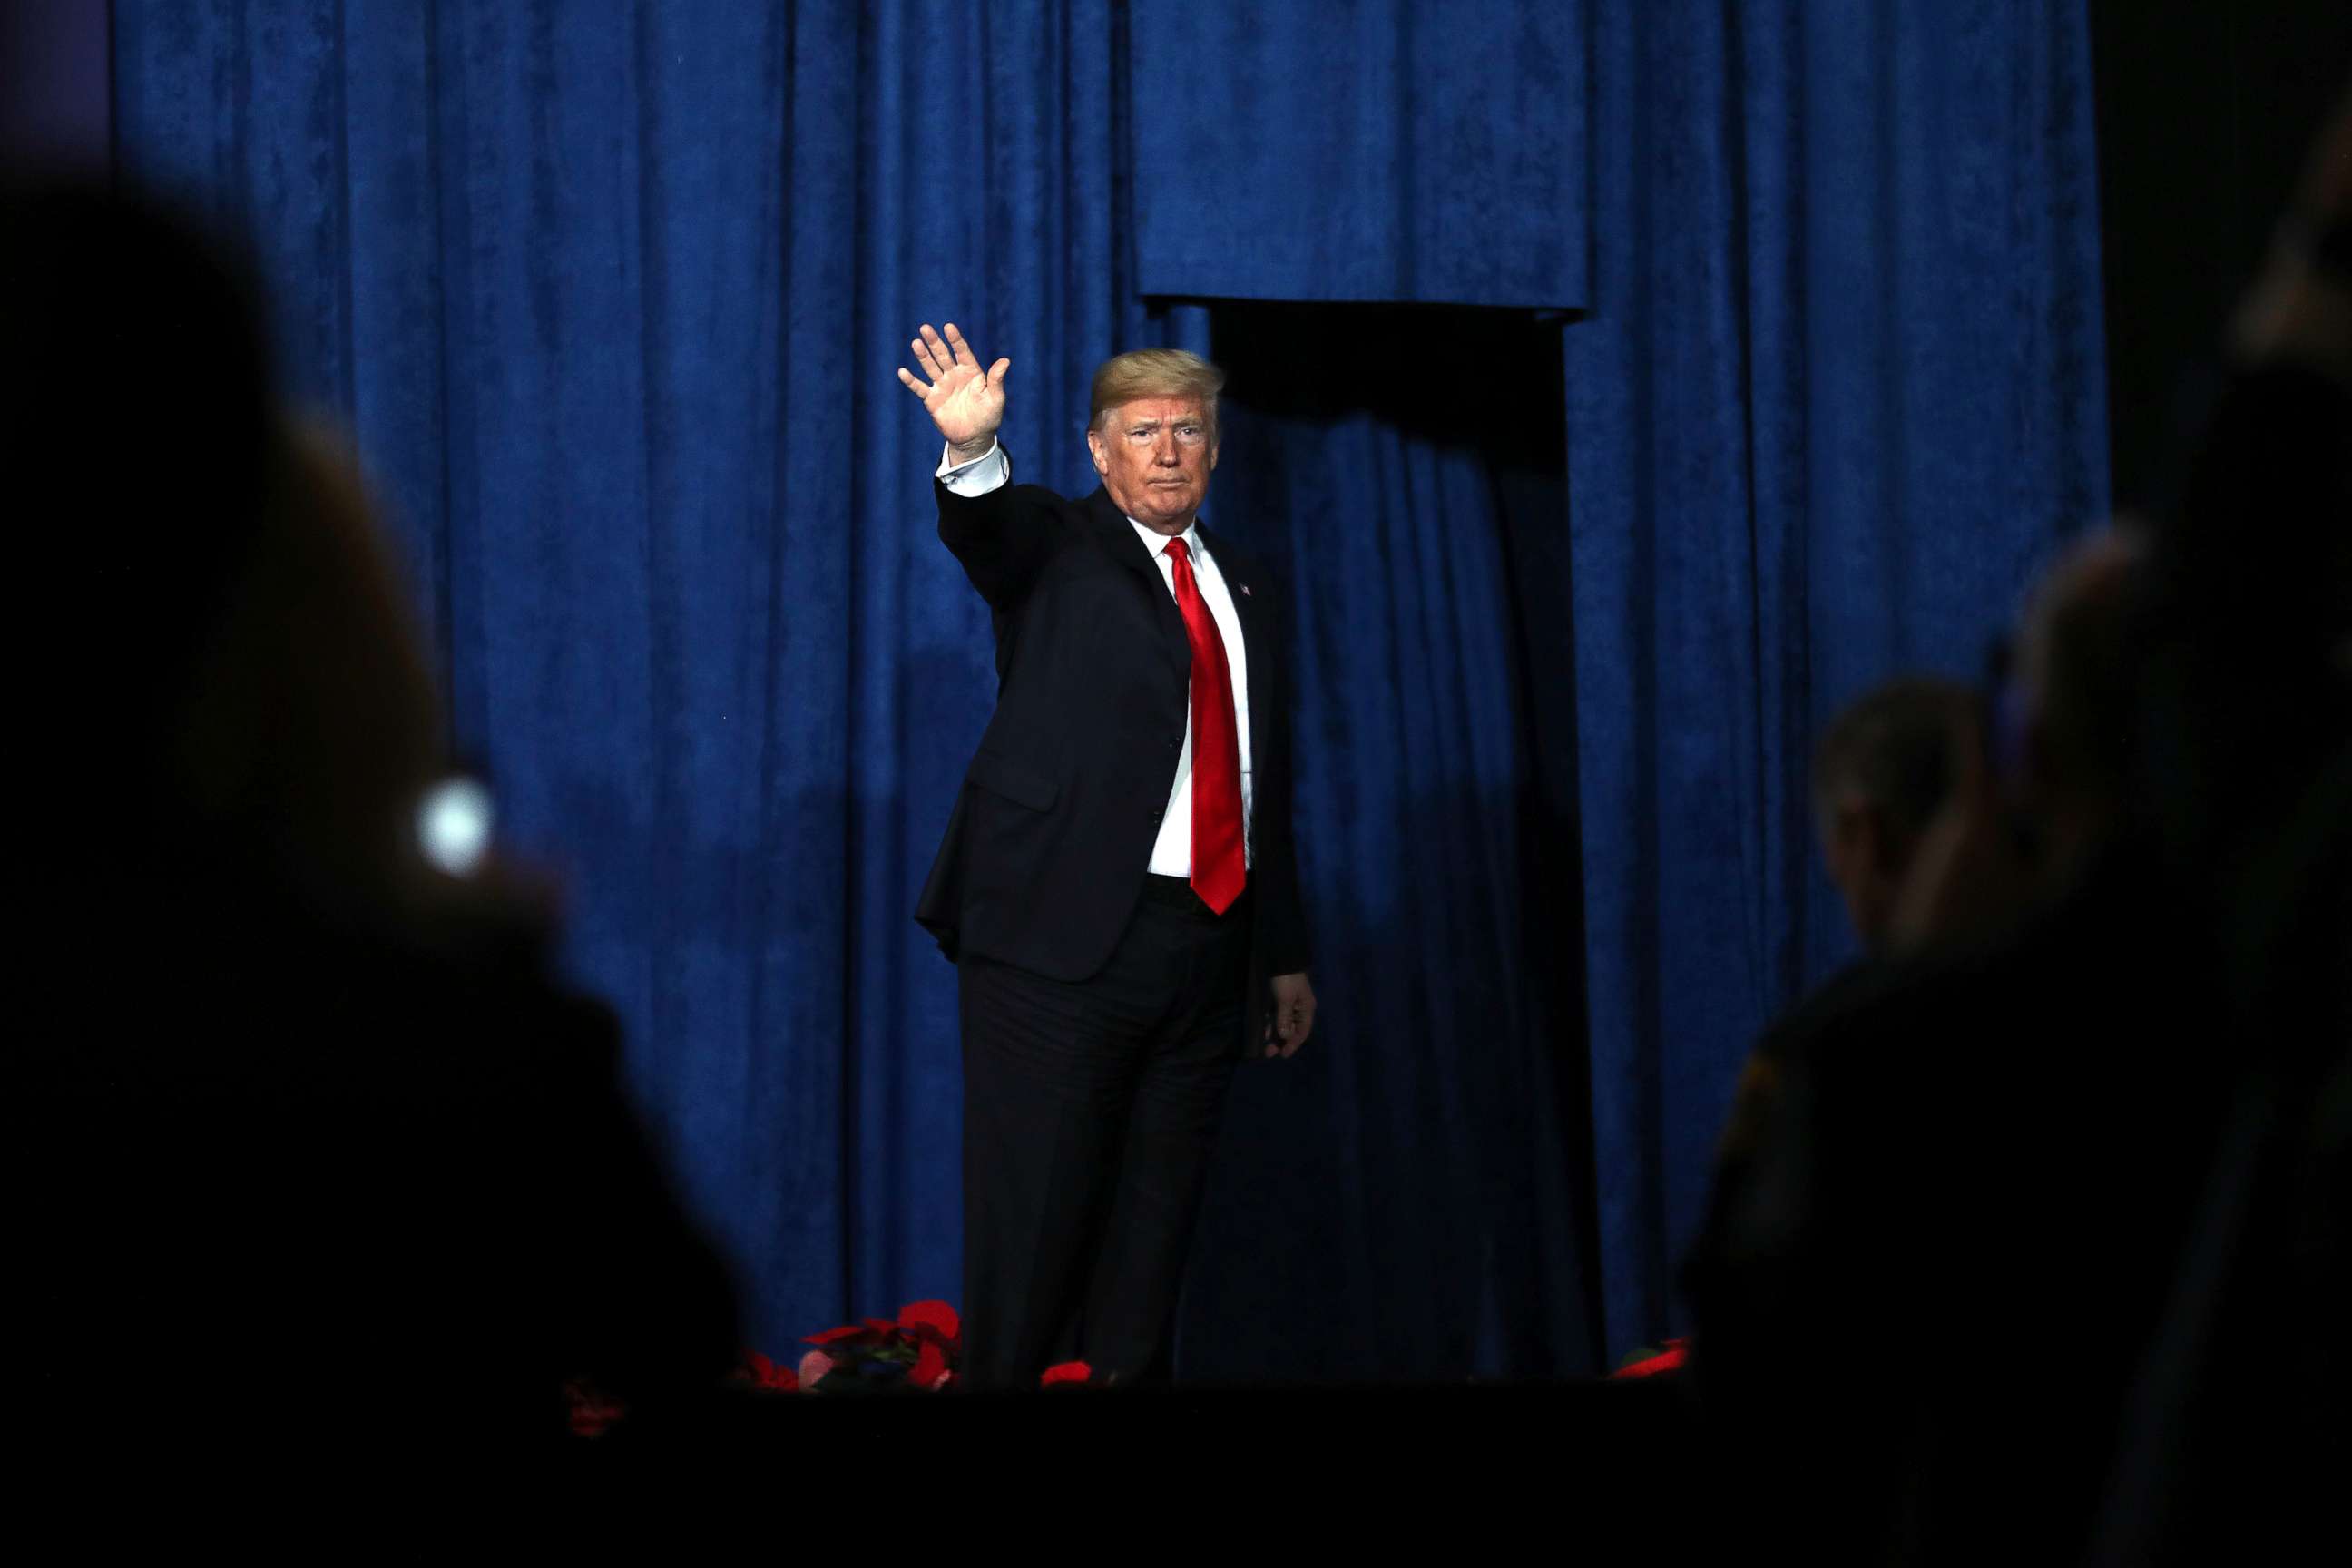 PHOTO: President Donald Trump waves to the crowd after addressing the Project Safe Neighborhoods National Conference In Kansas City, Dec. 7, 2018 in Kansas City, Missouri.